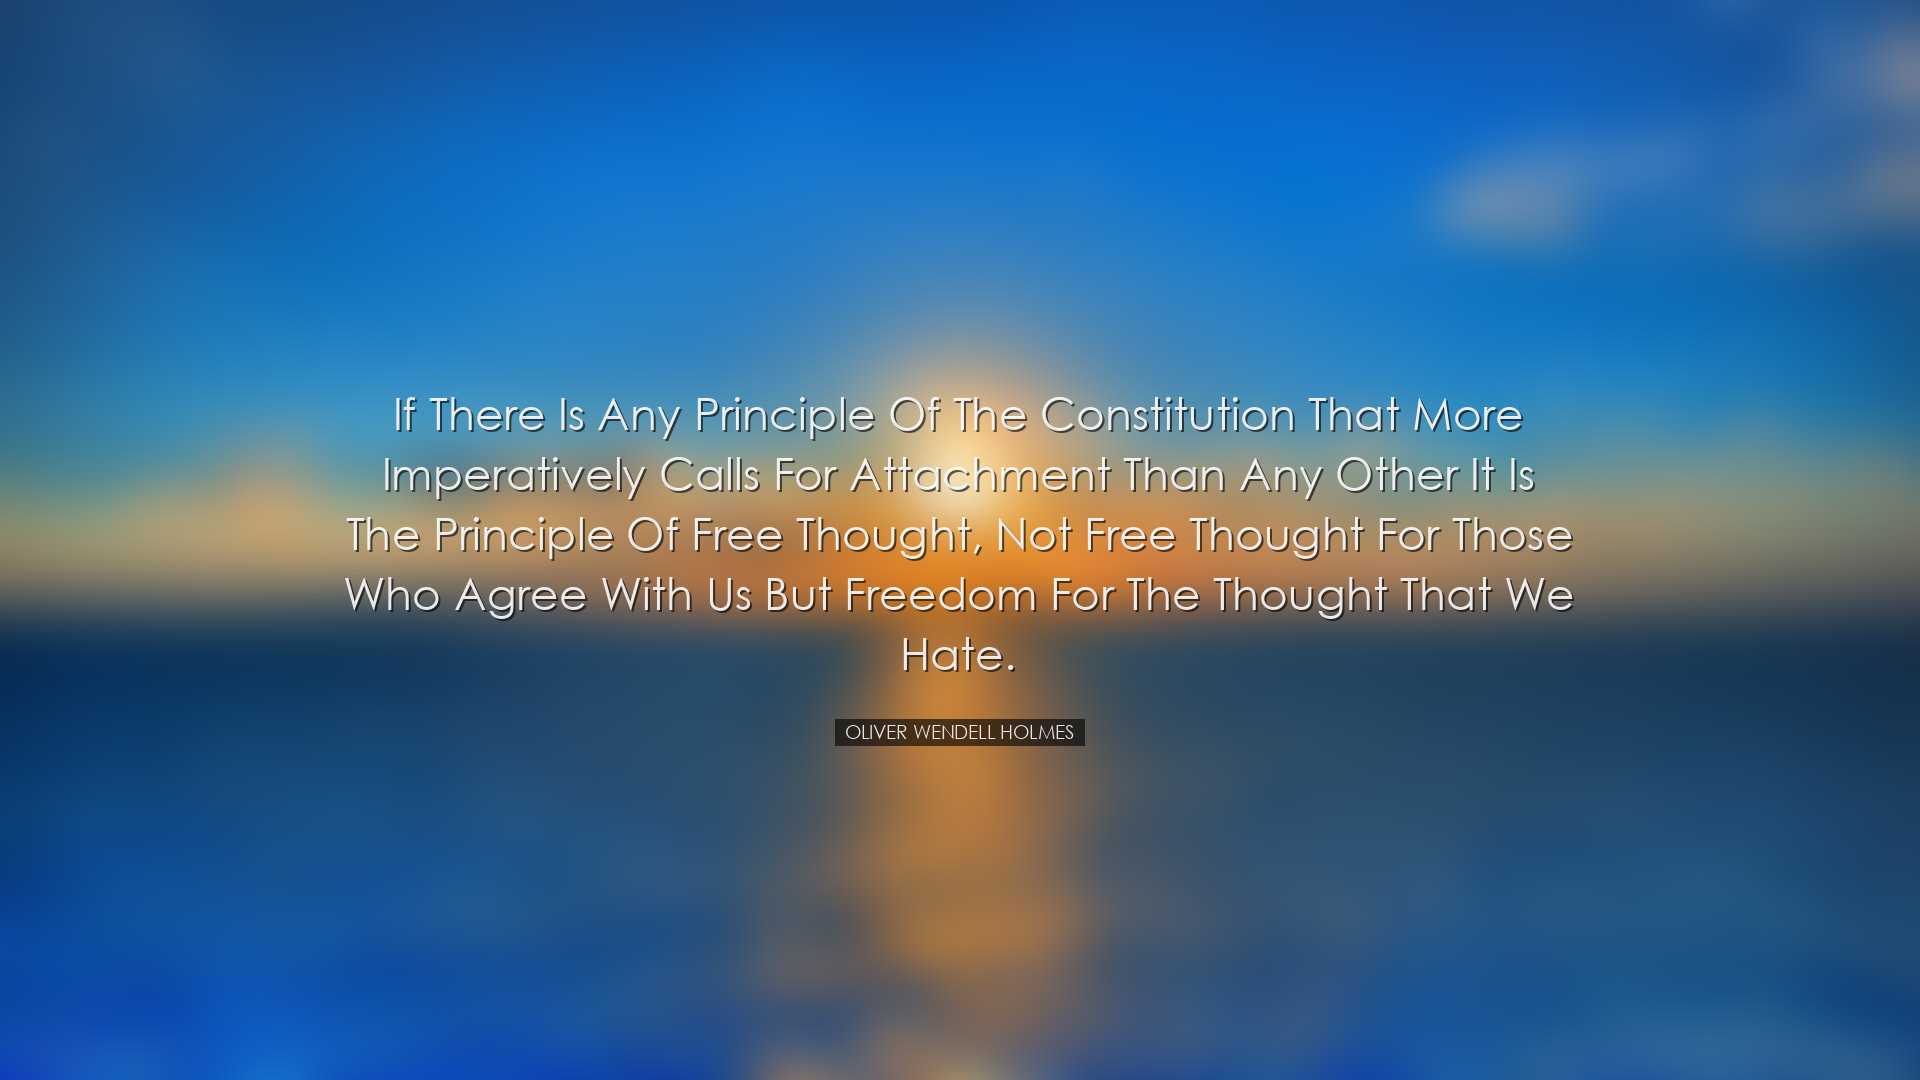 If there is any principle of the Constitution that more imperative